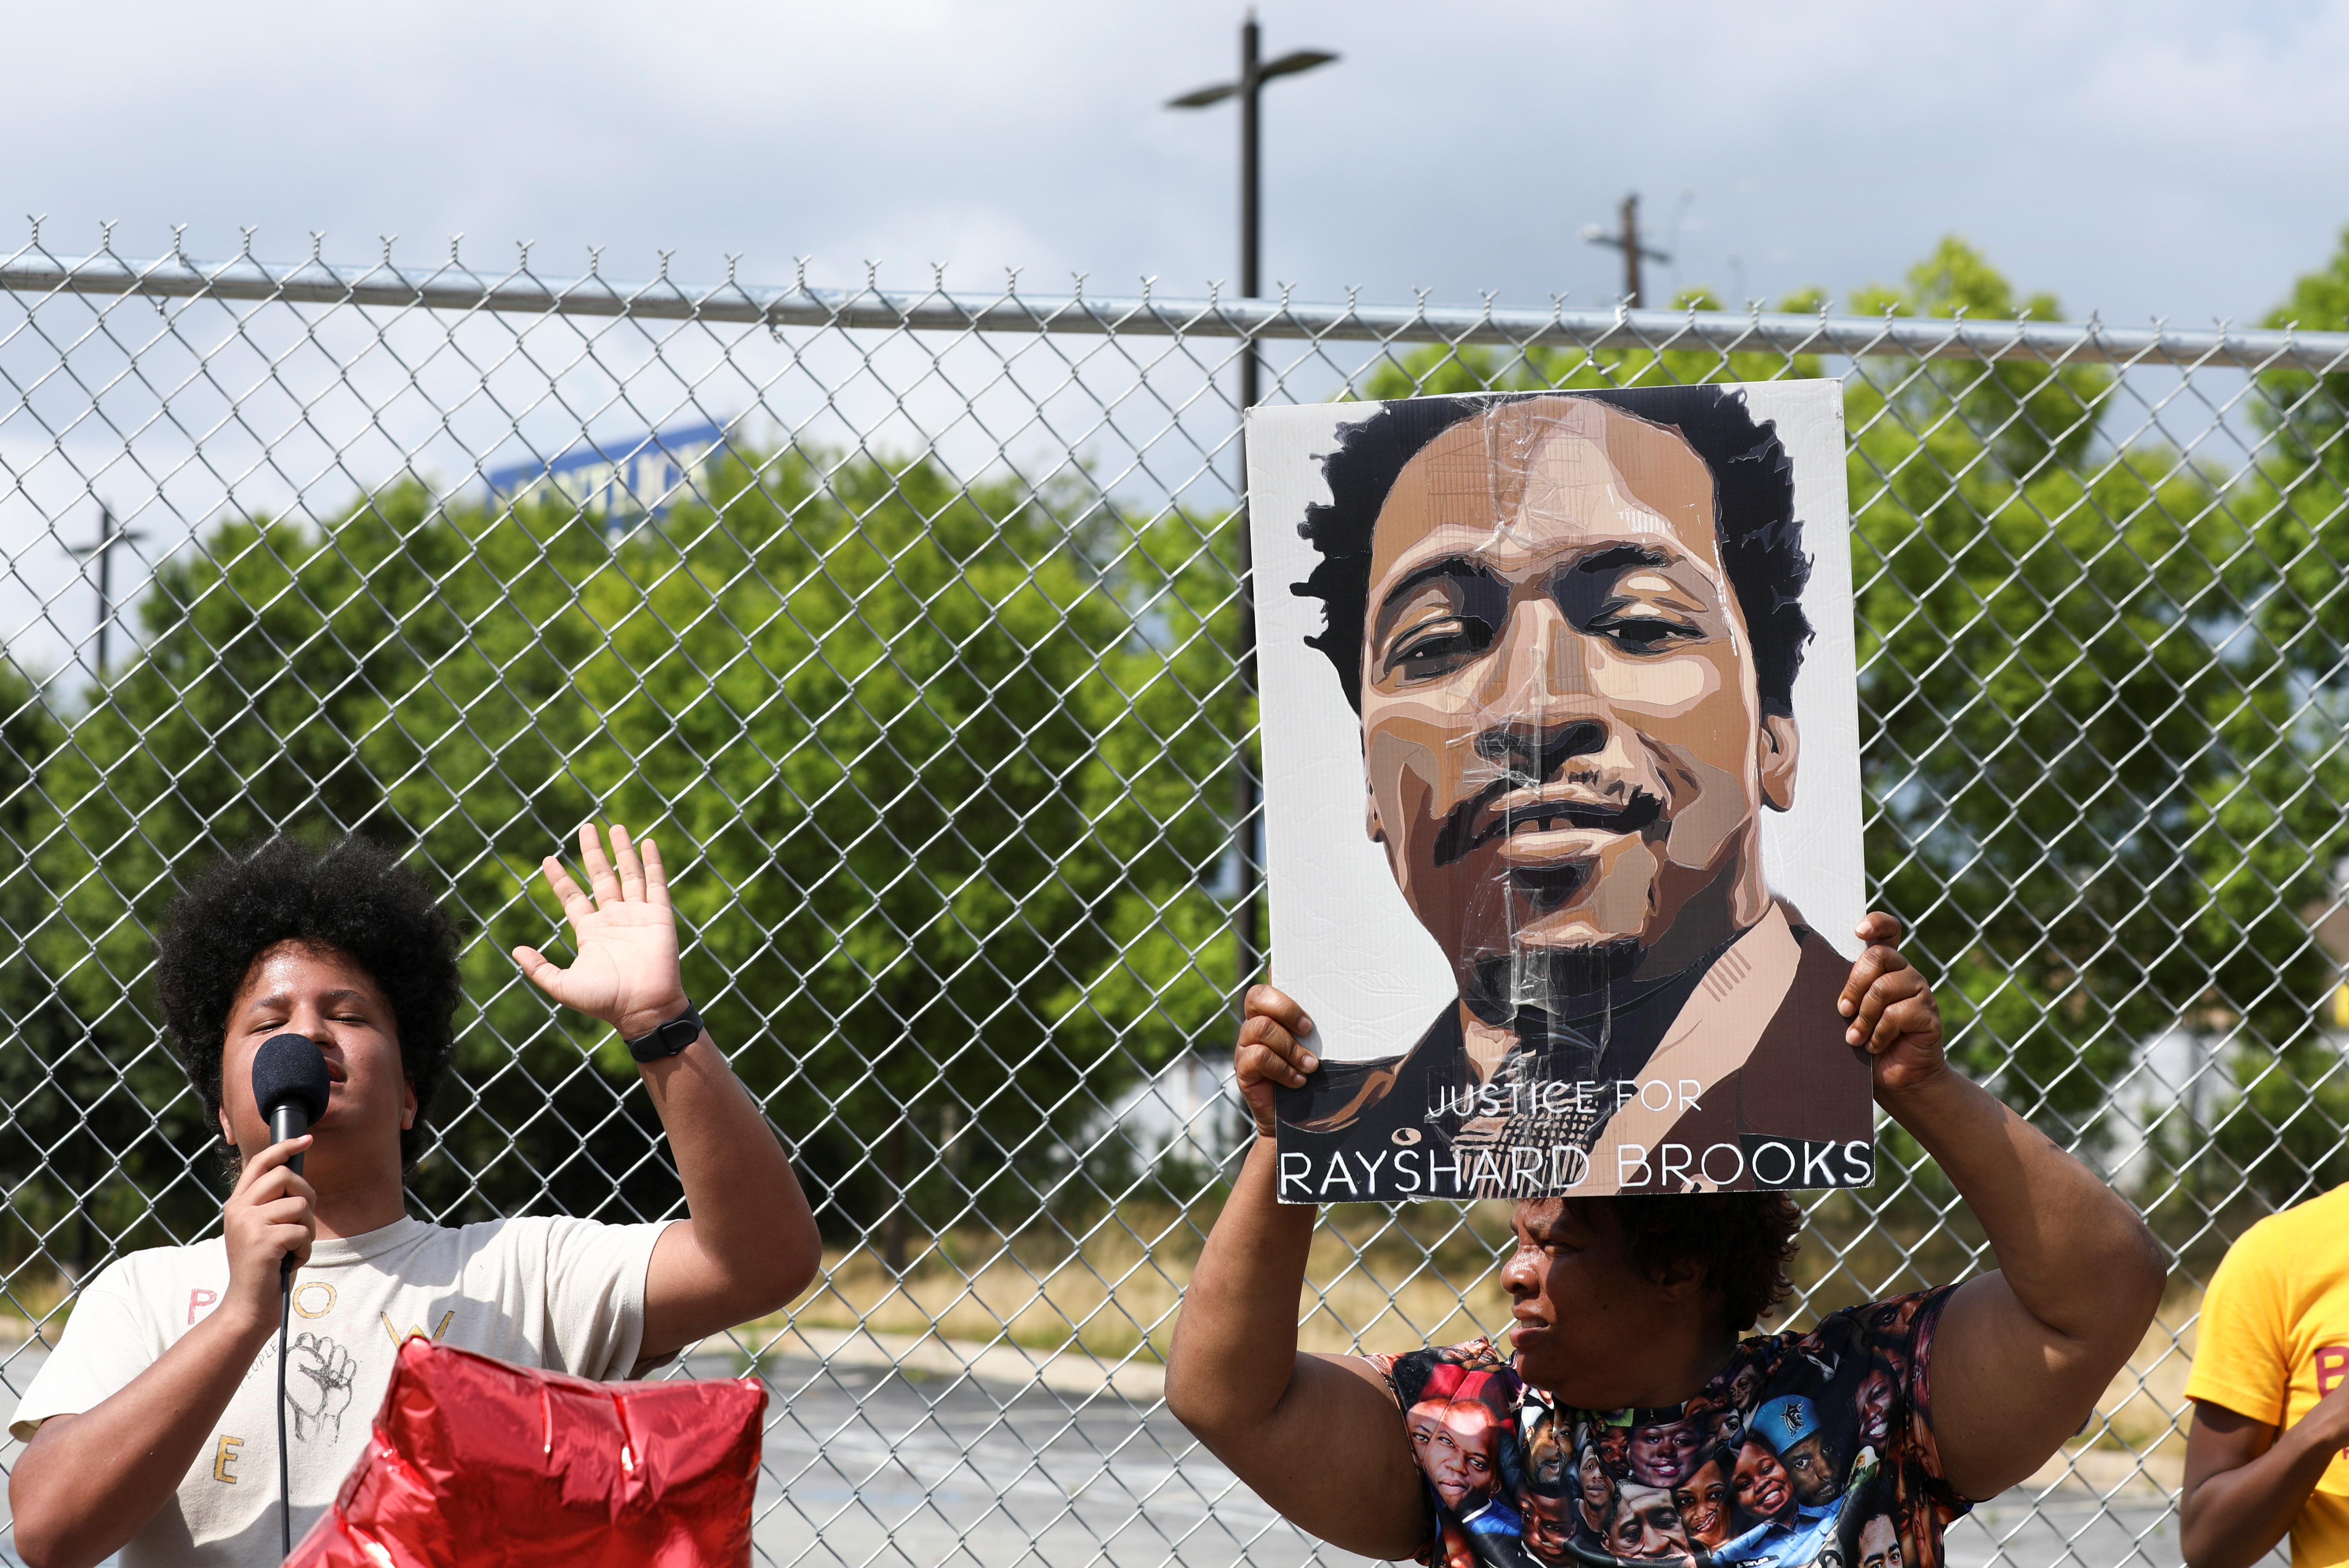 People attend a rally for racial justice on the one year anniversary of the police shooting of Rayshard Brooks, in Atlanta